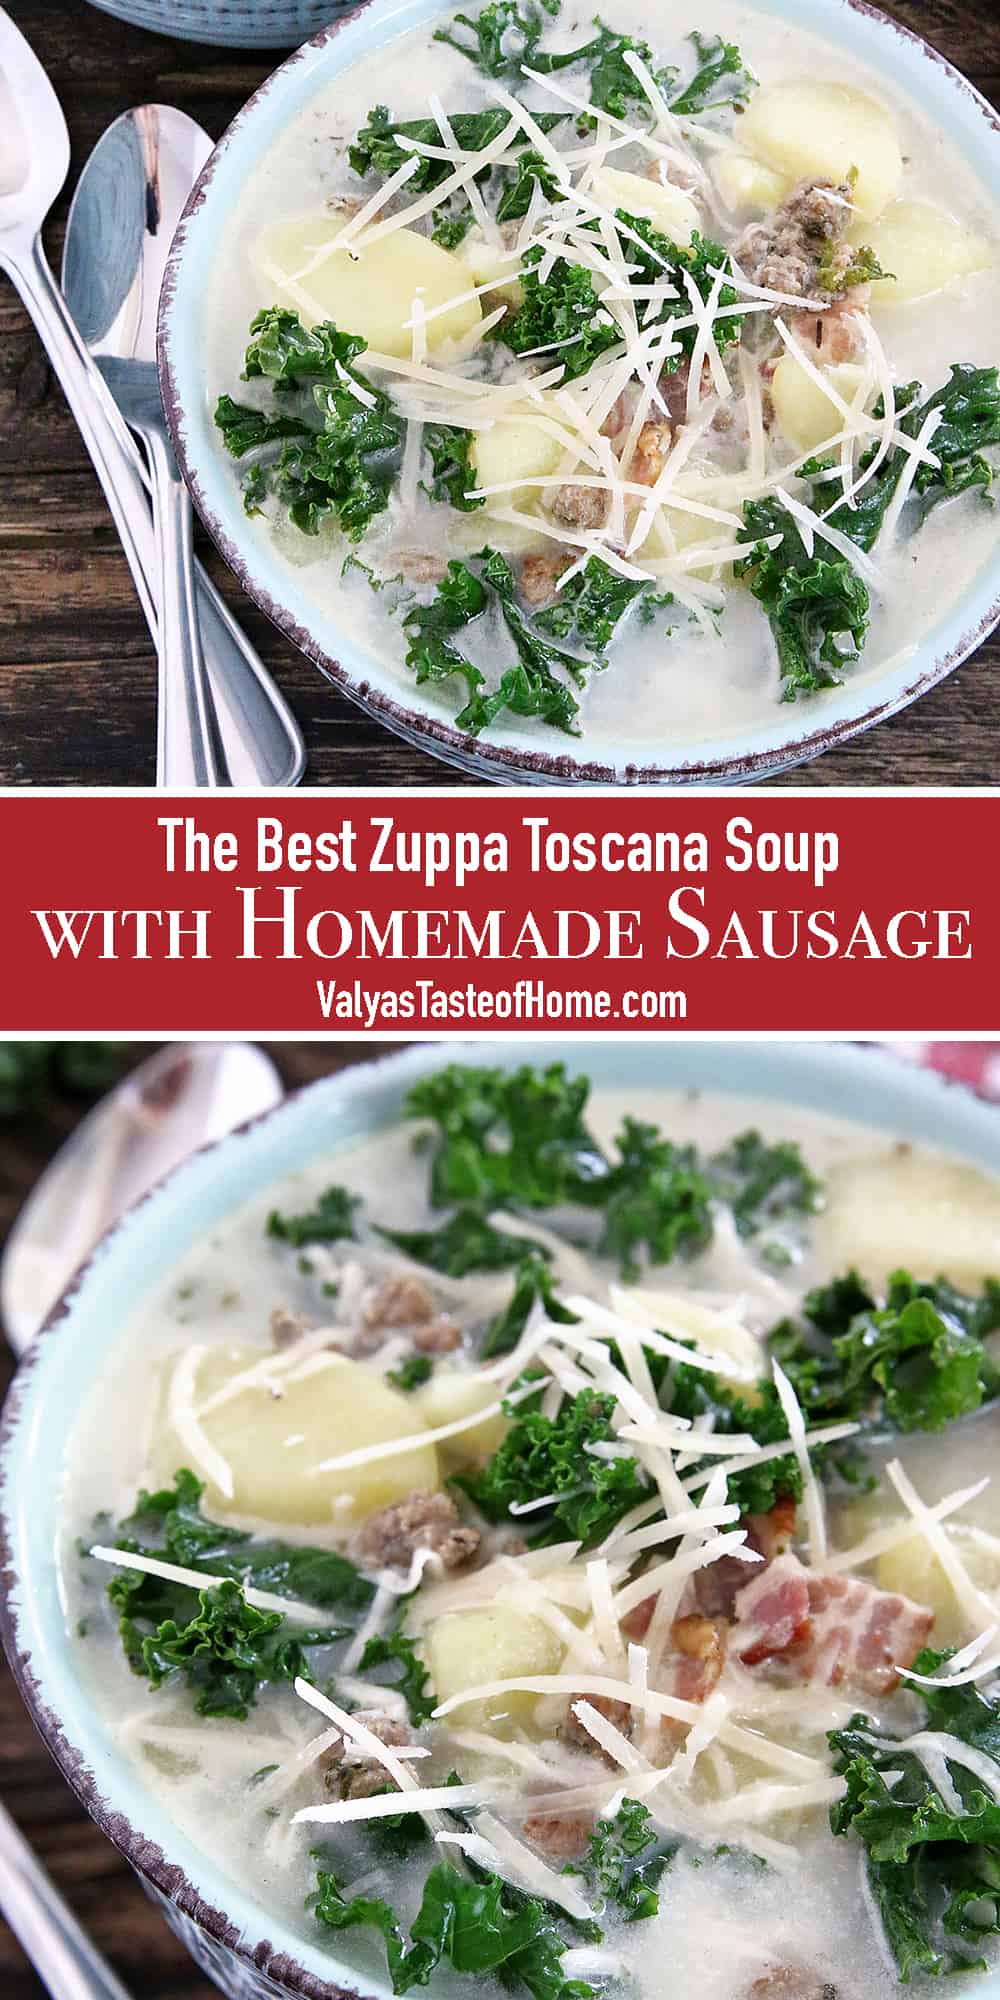 Everyone's homemade recipes for Zuppa are pretty similar, but this recipe is The Best Zuppa Toscana Soup with Homemade Sausage - according to my picky little eaters.